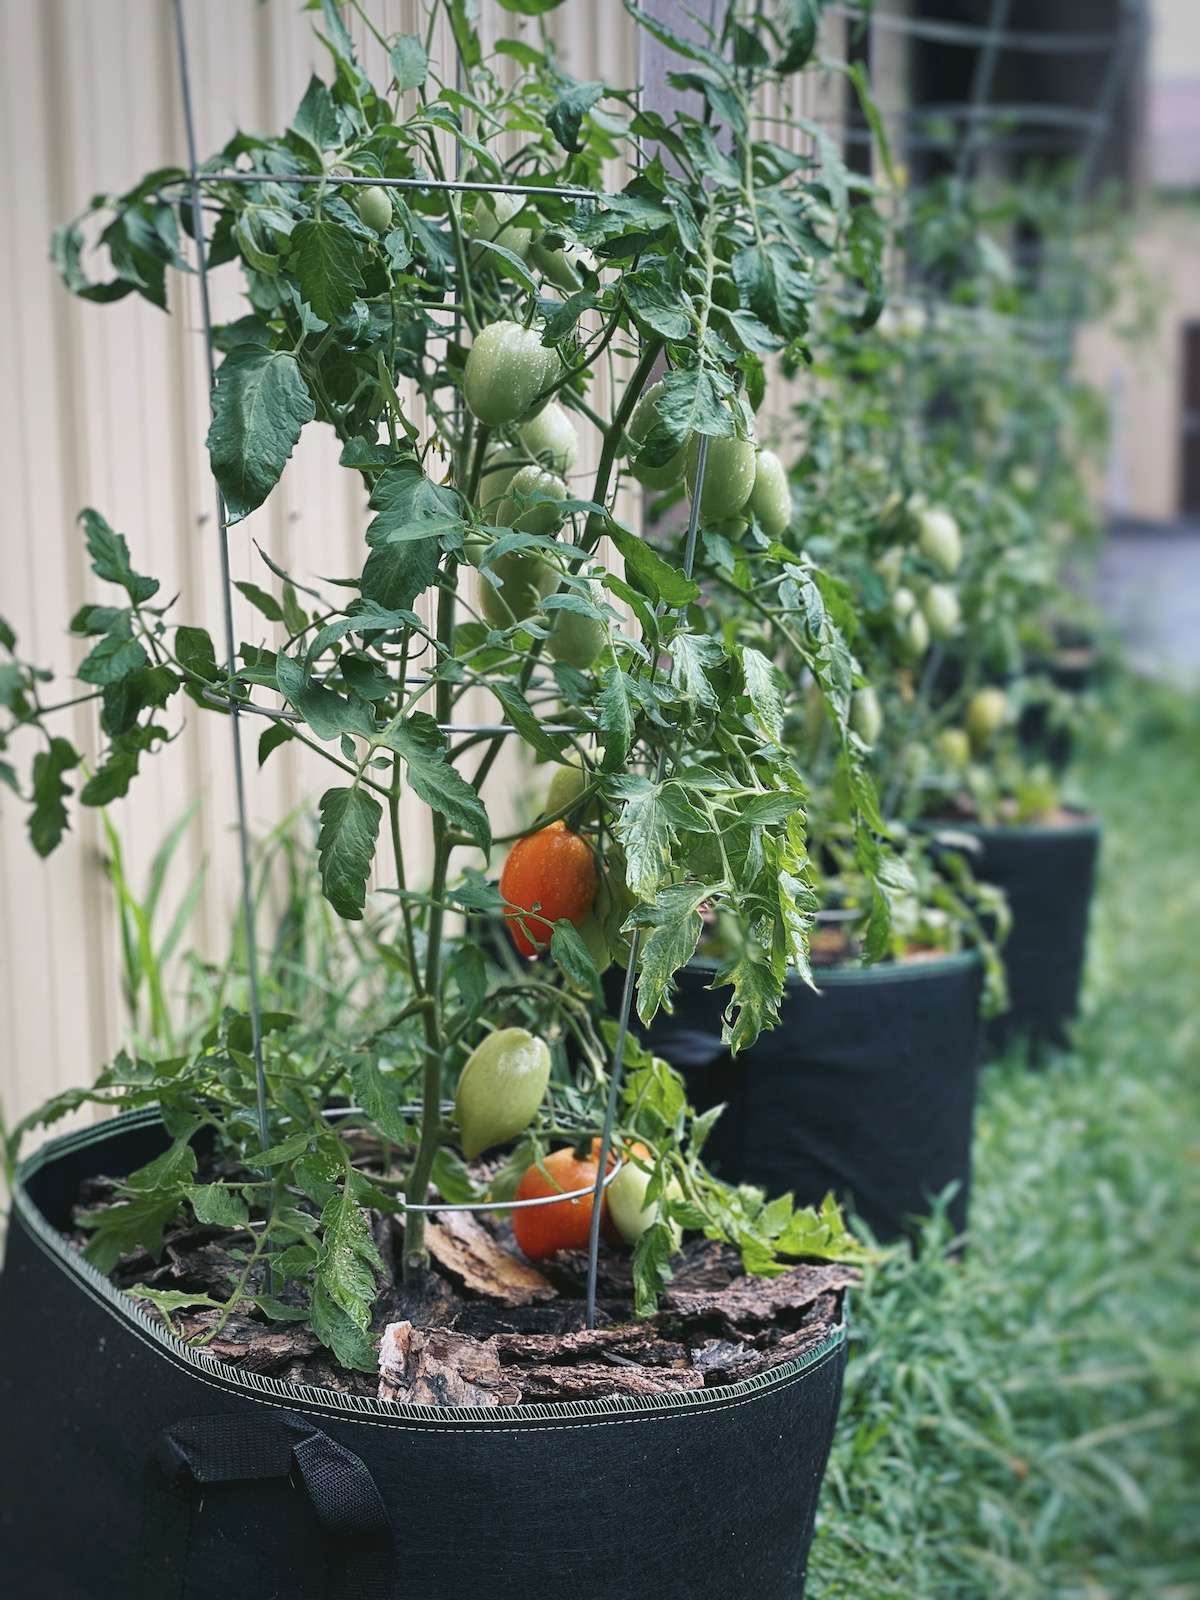 Growing Tomatoes in Grow Bags: A Comprehensive Guide